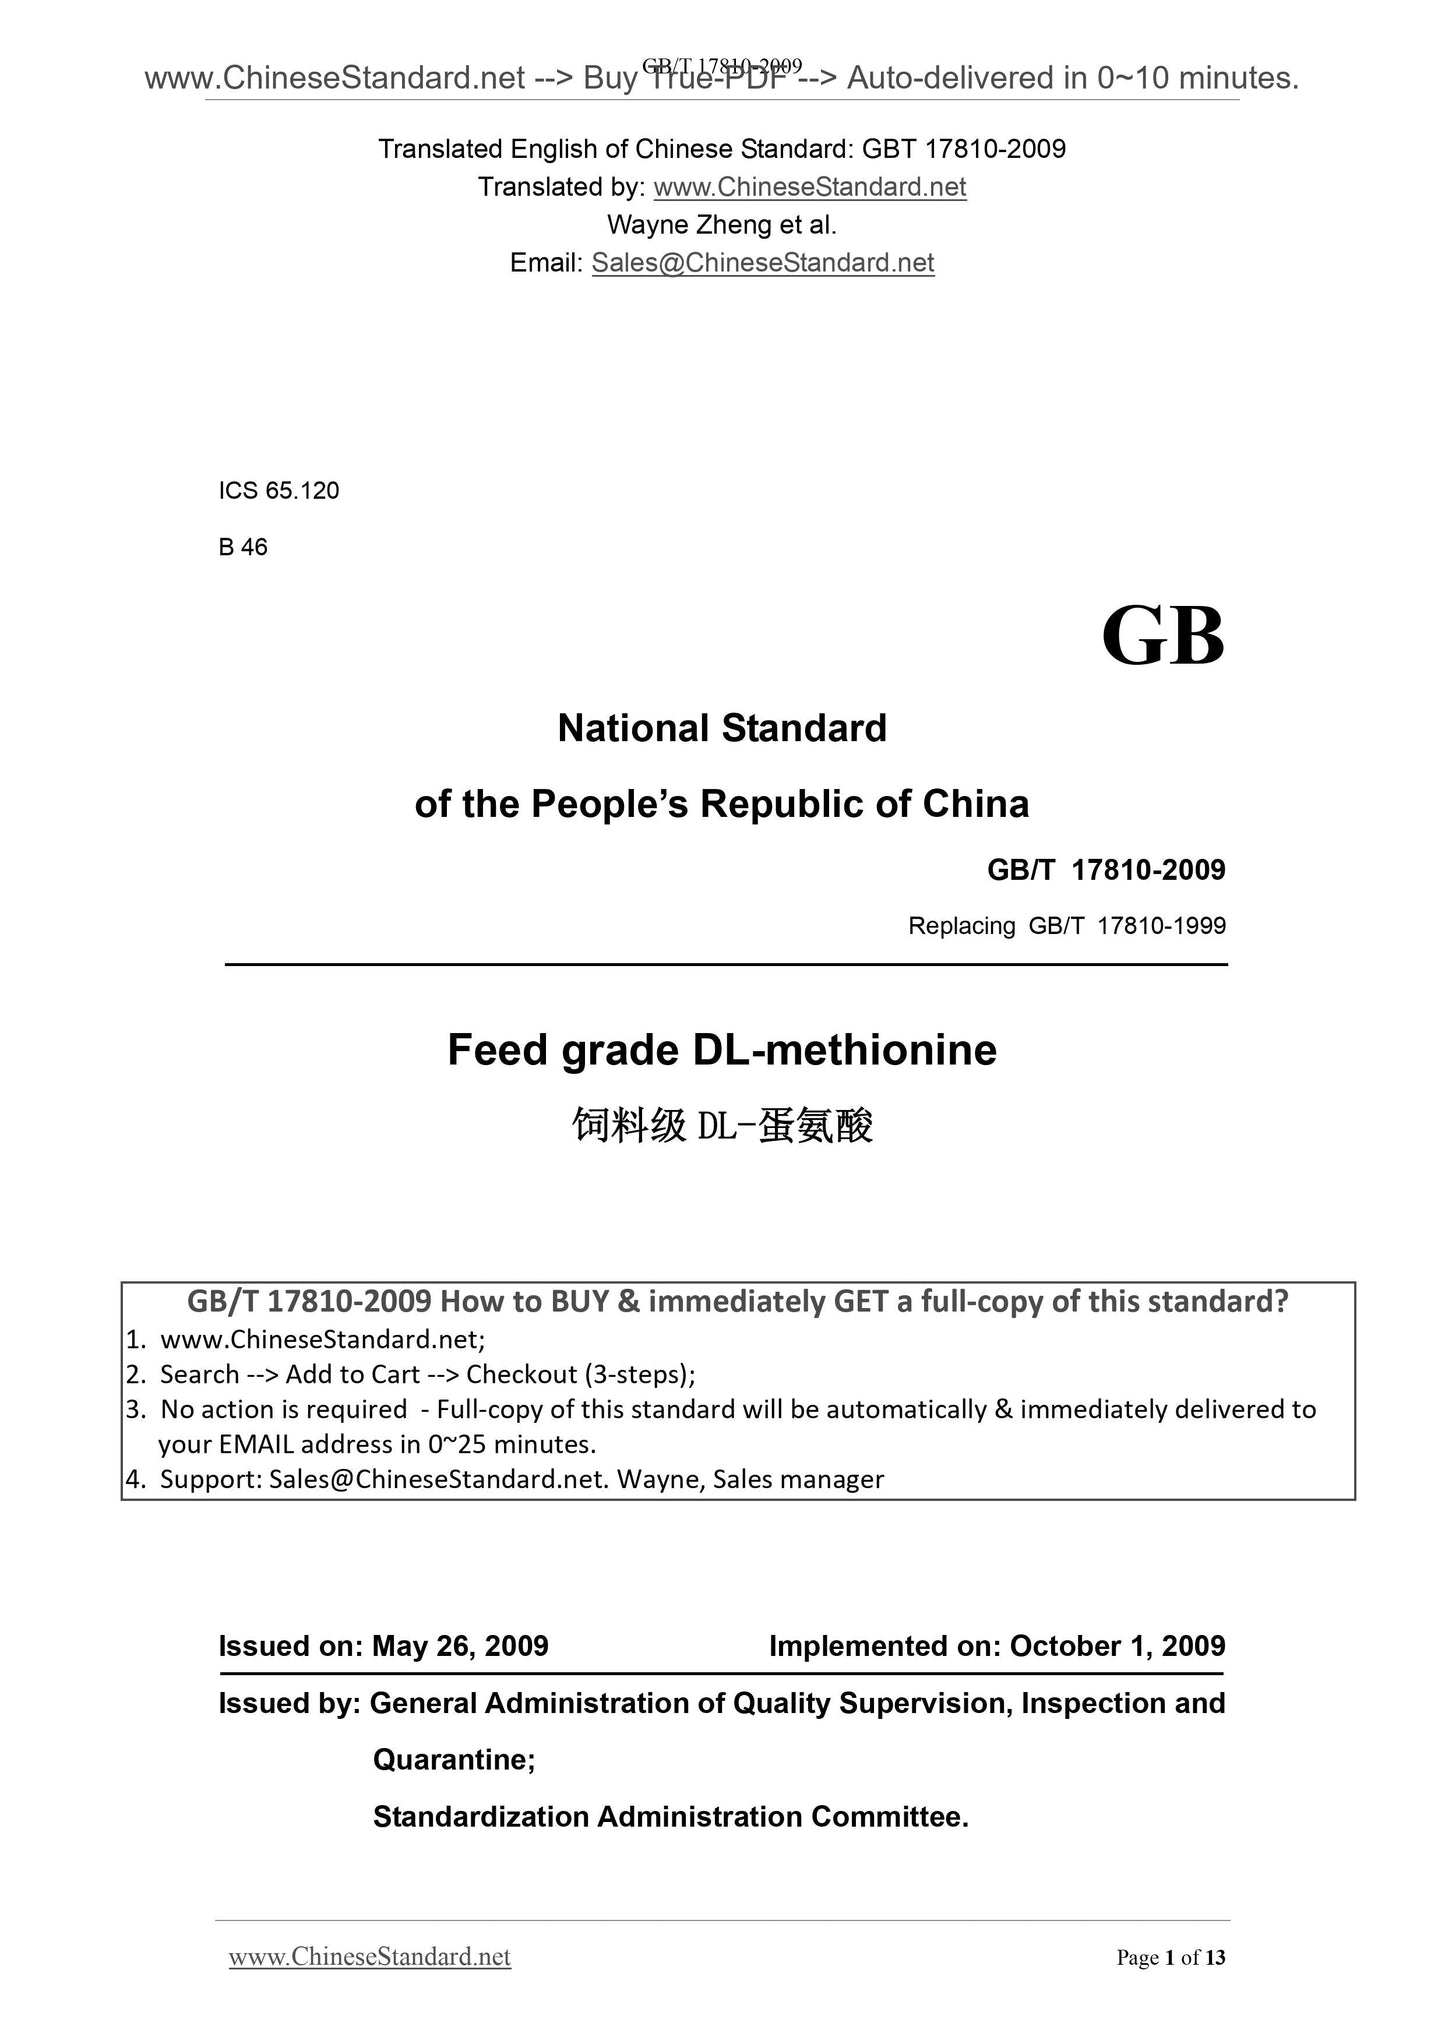 GB/T 17810-2009 Page 1